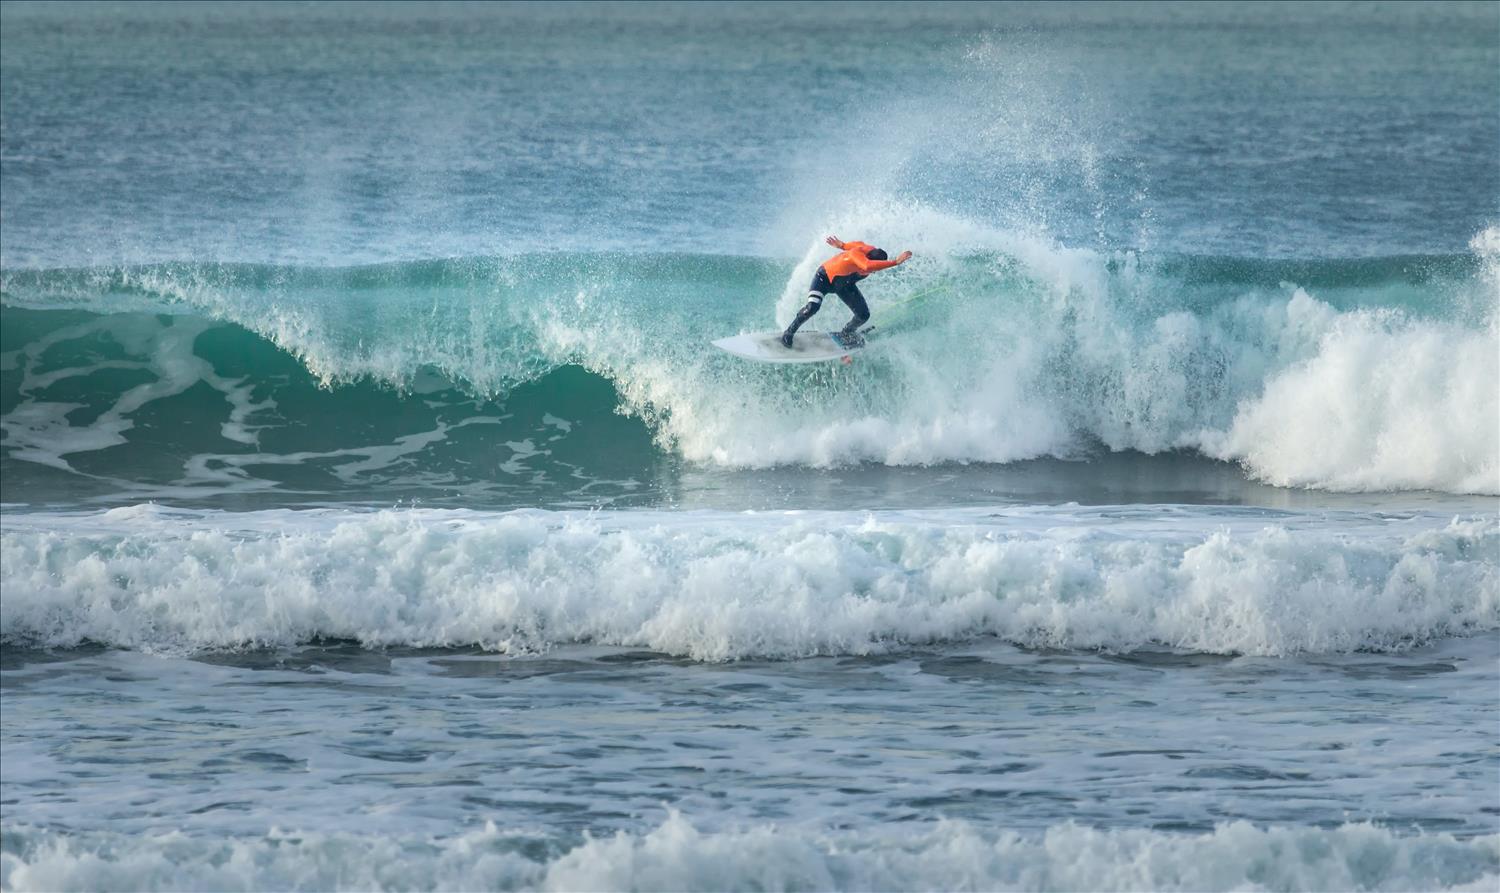 A surfer in a bright orange top rides the waves at Fistral Beach, Newquay